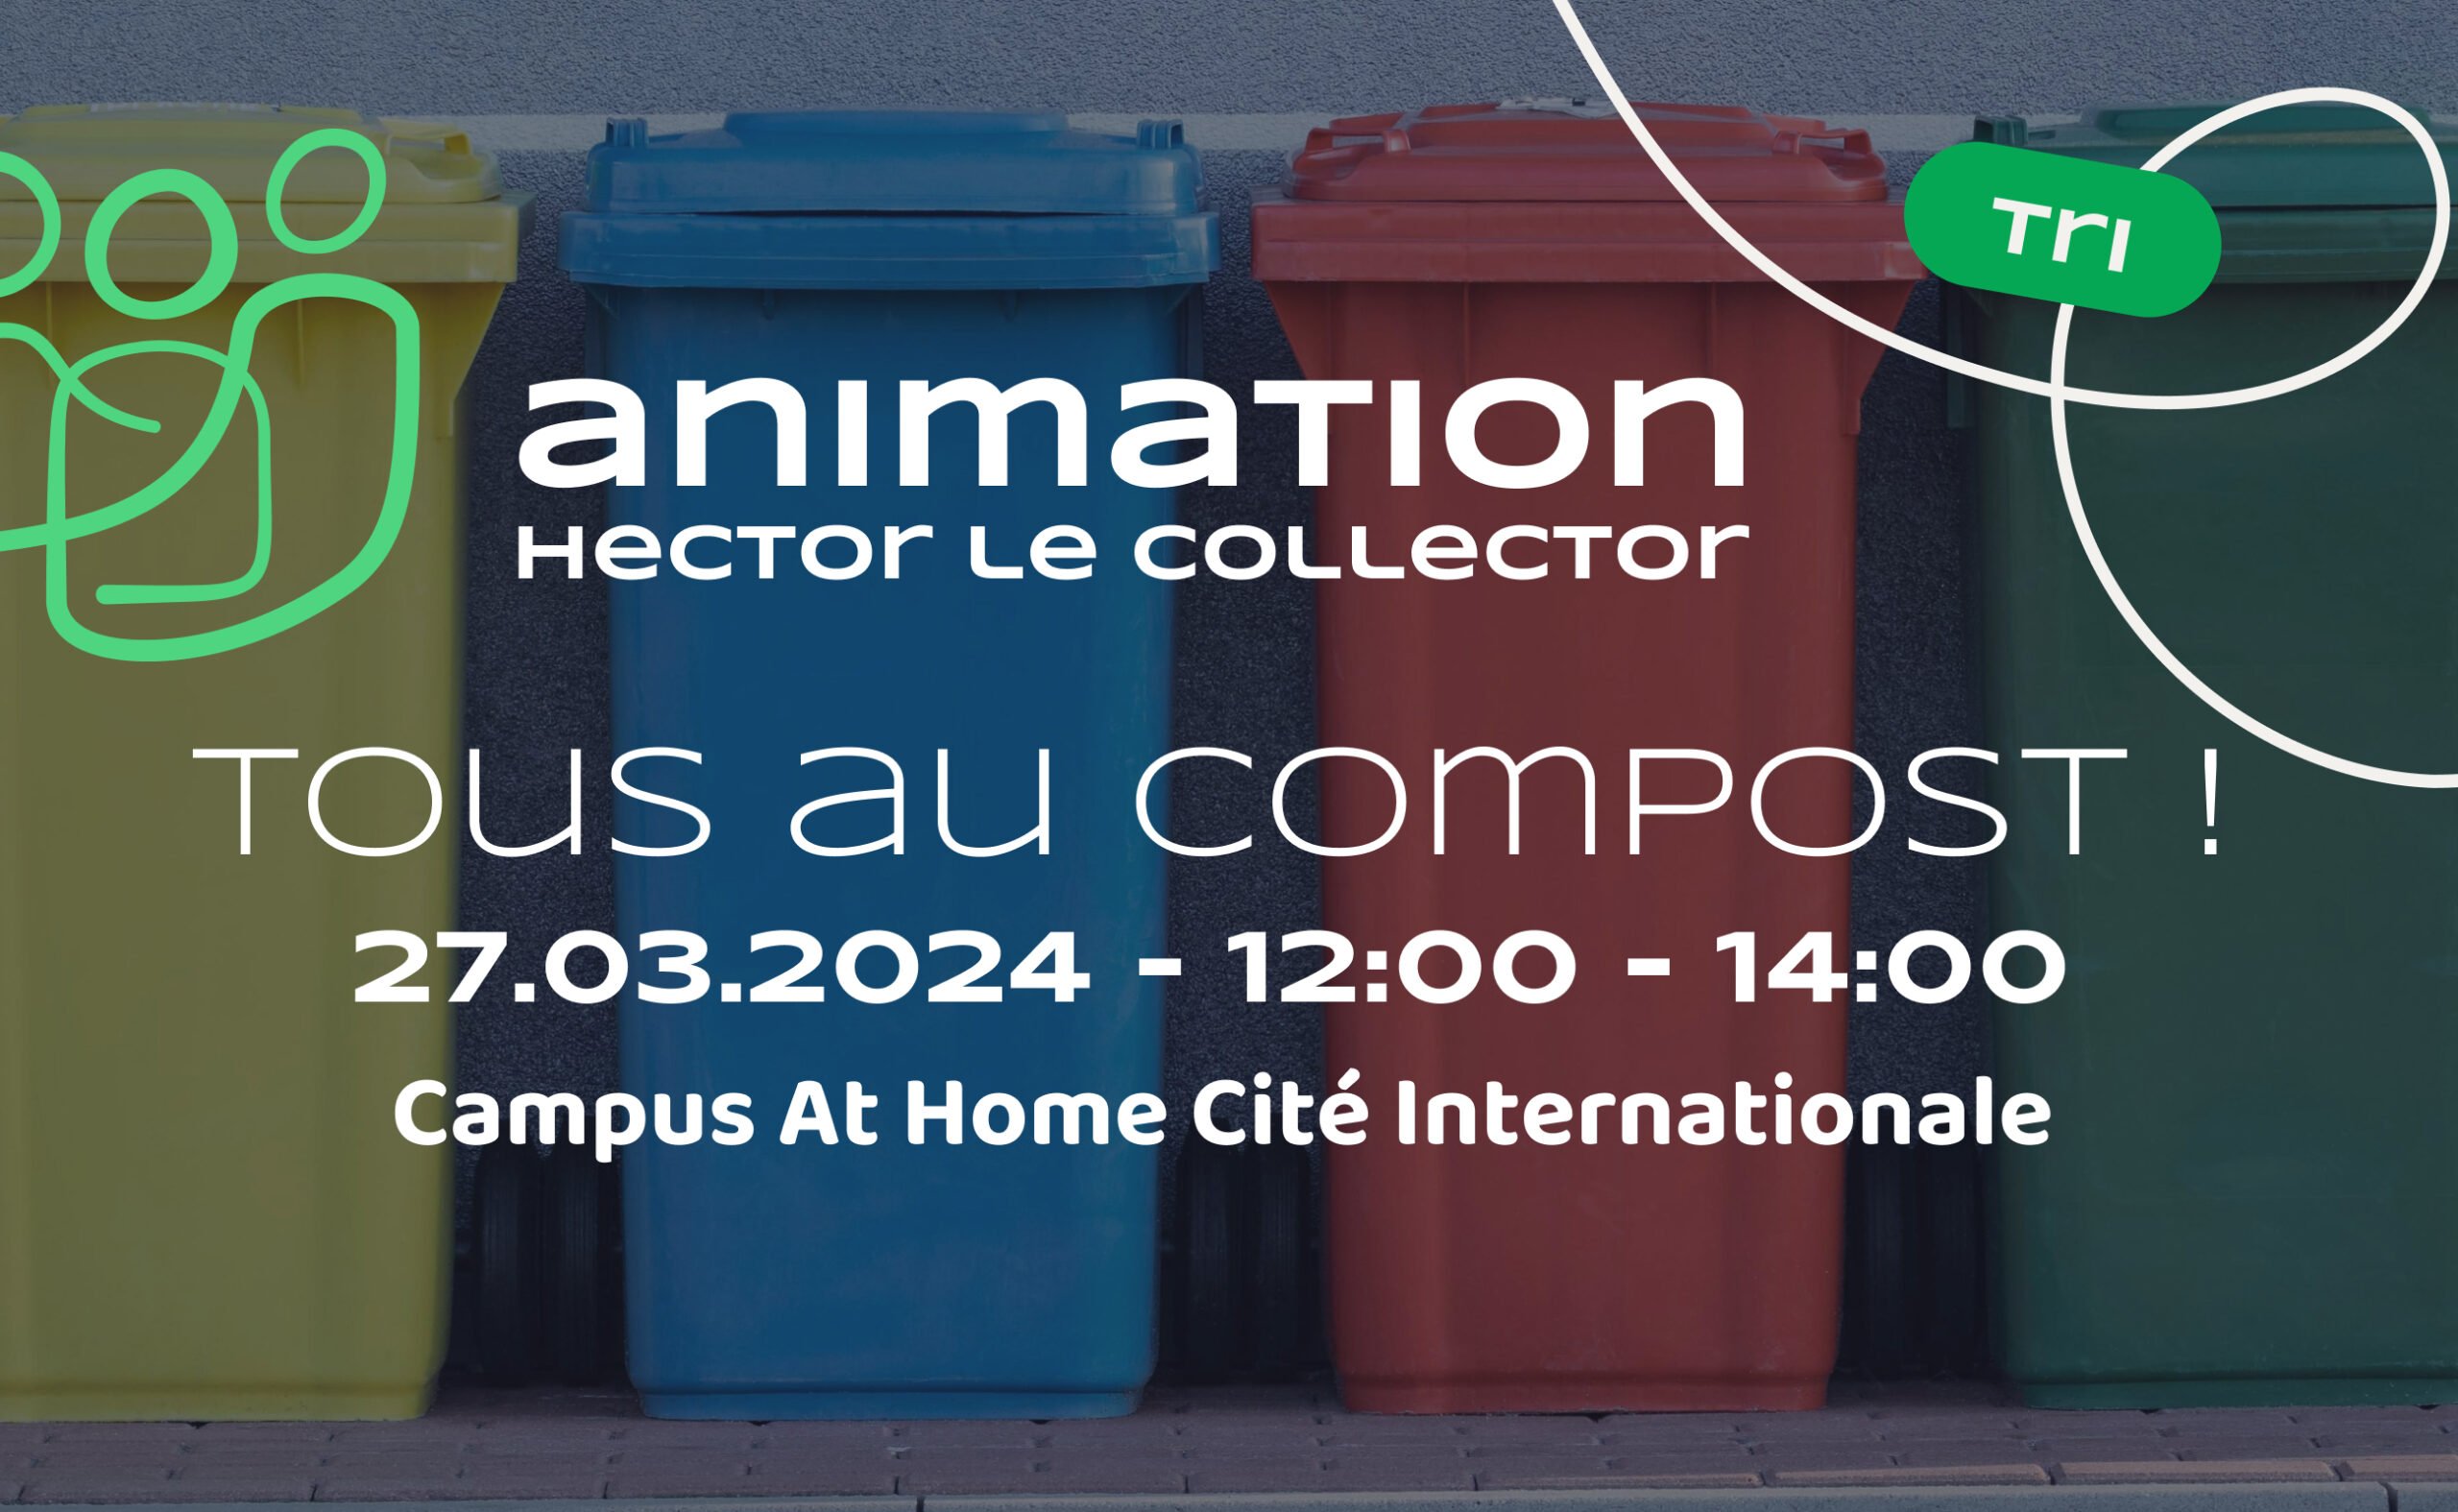 Evenement toulouse coworking tri recyclage compost